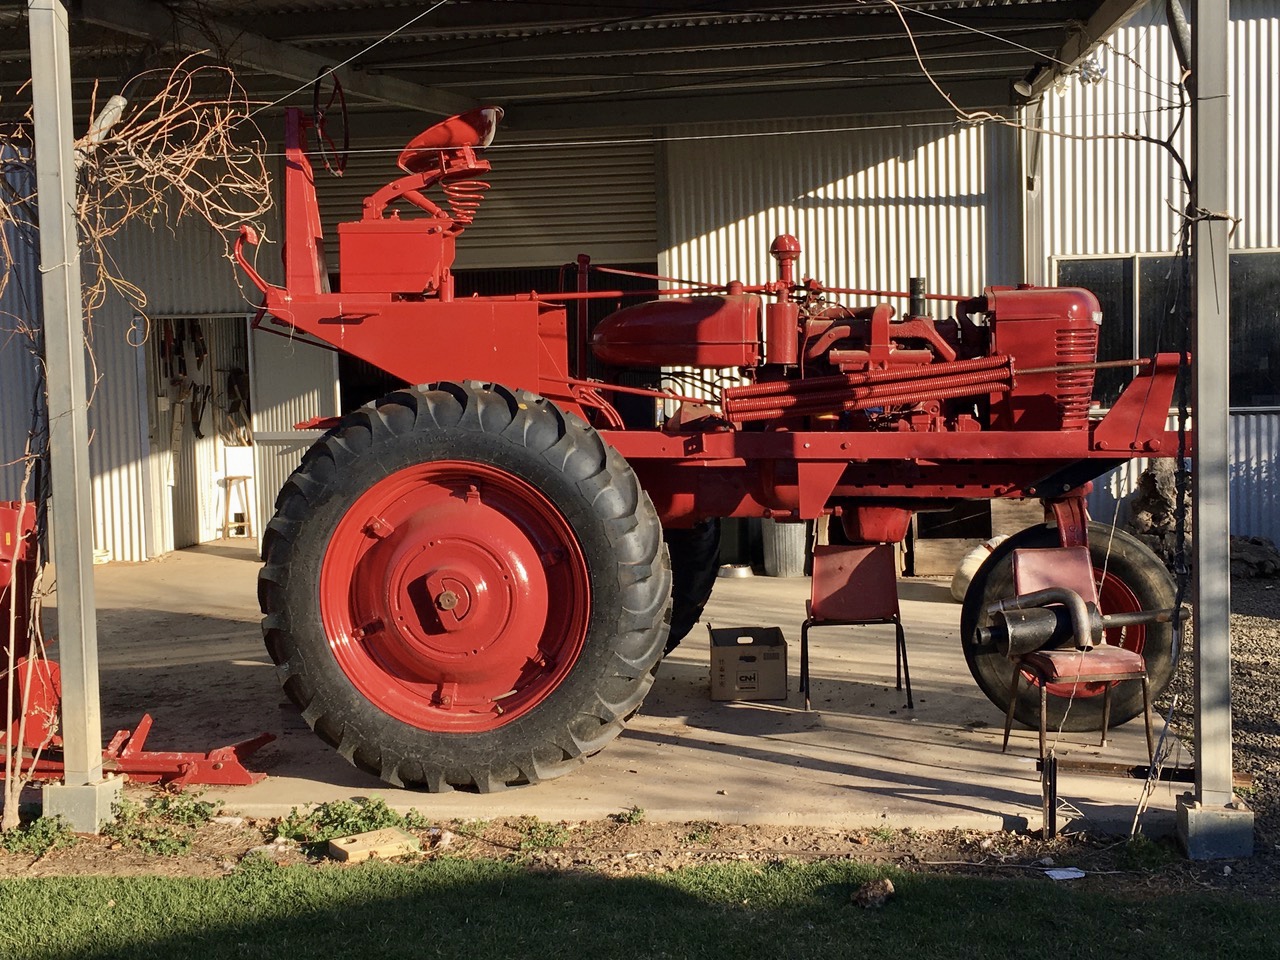 The elusive search for parts has taken the Revells on many adventures – they travelled to Toowoomba to find the perfect Farmall MD tractor to sit the picker on and even had to ‘go global’ in their pursuit of some pieces, thanks to the internet the parts could be ordered online.